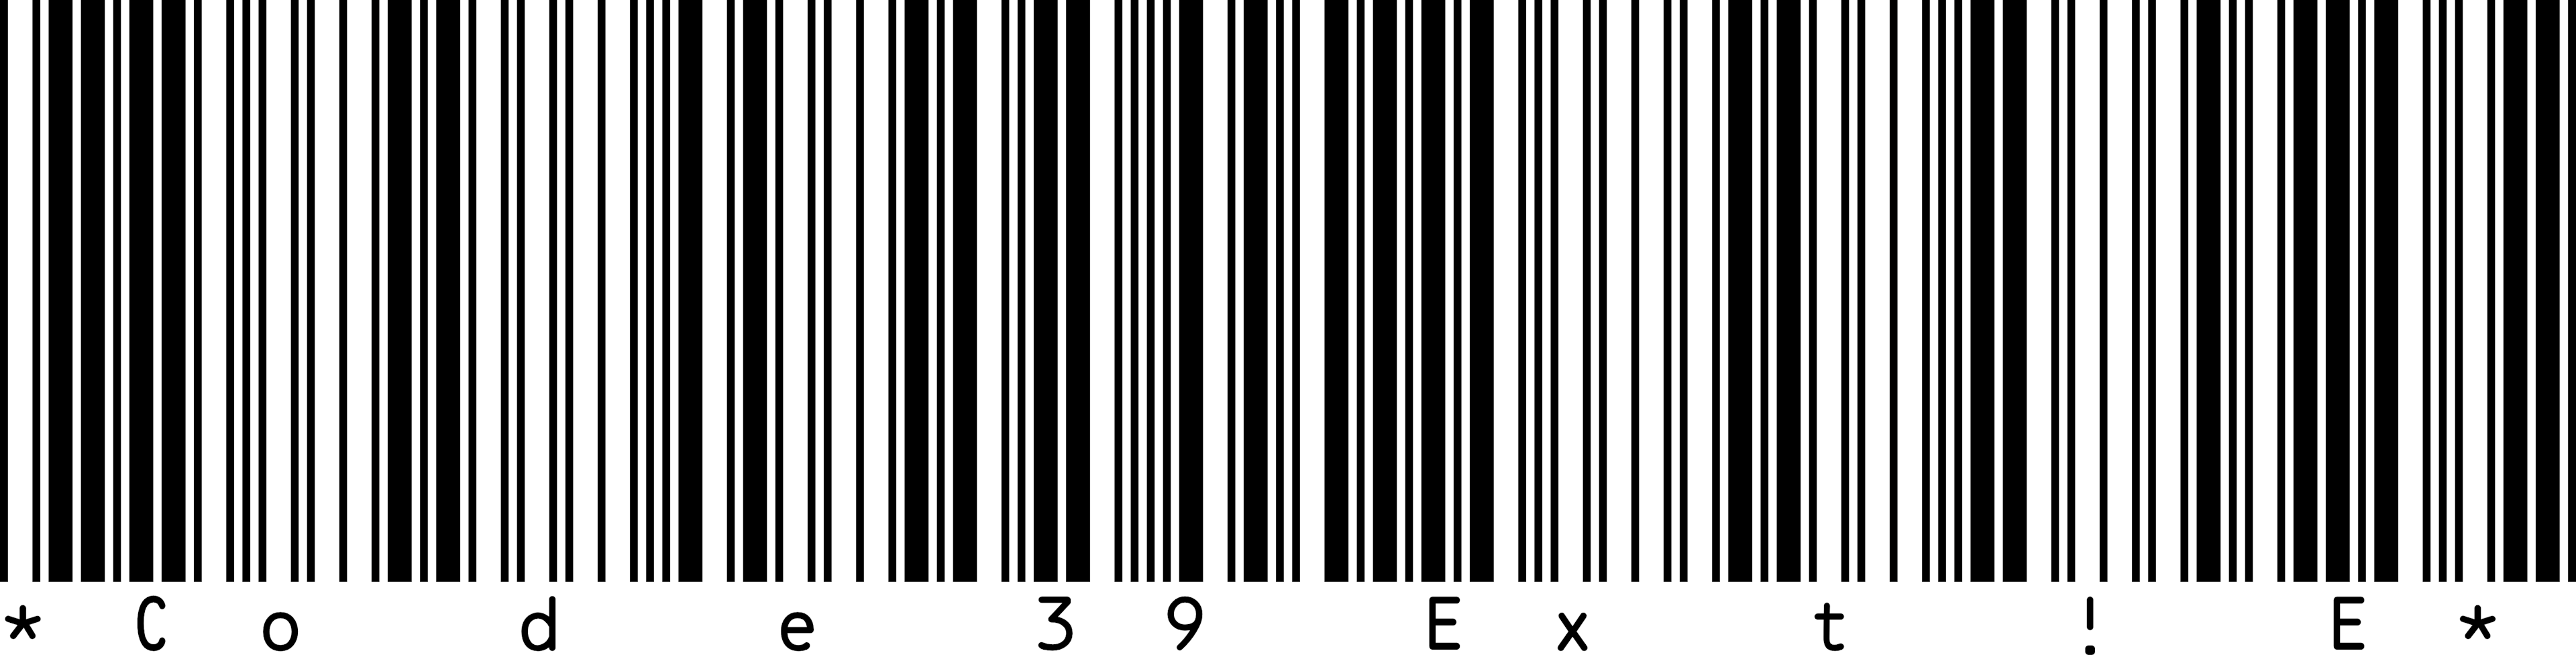 Example of Code39Extended Barcode